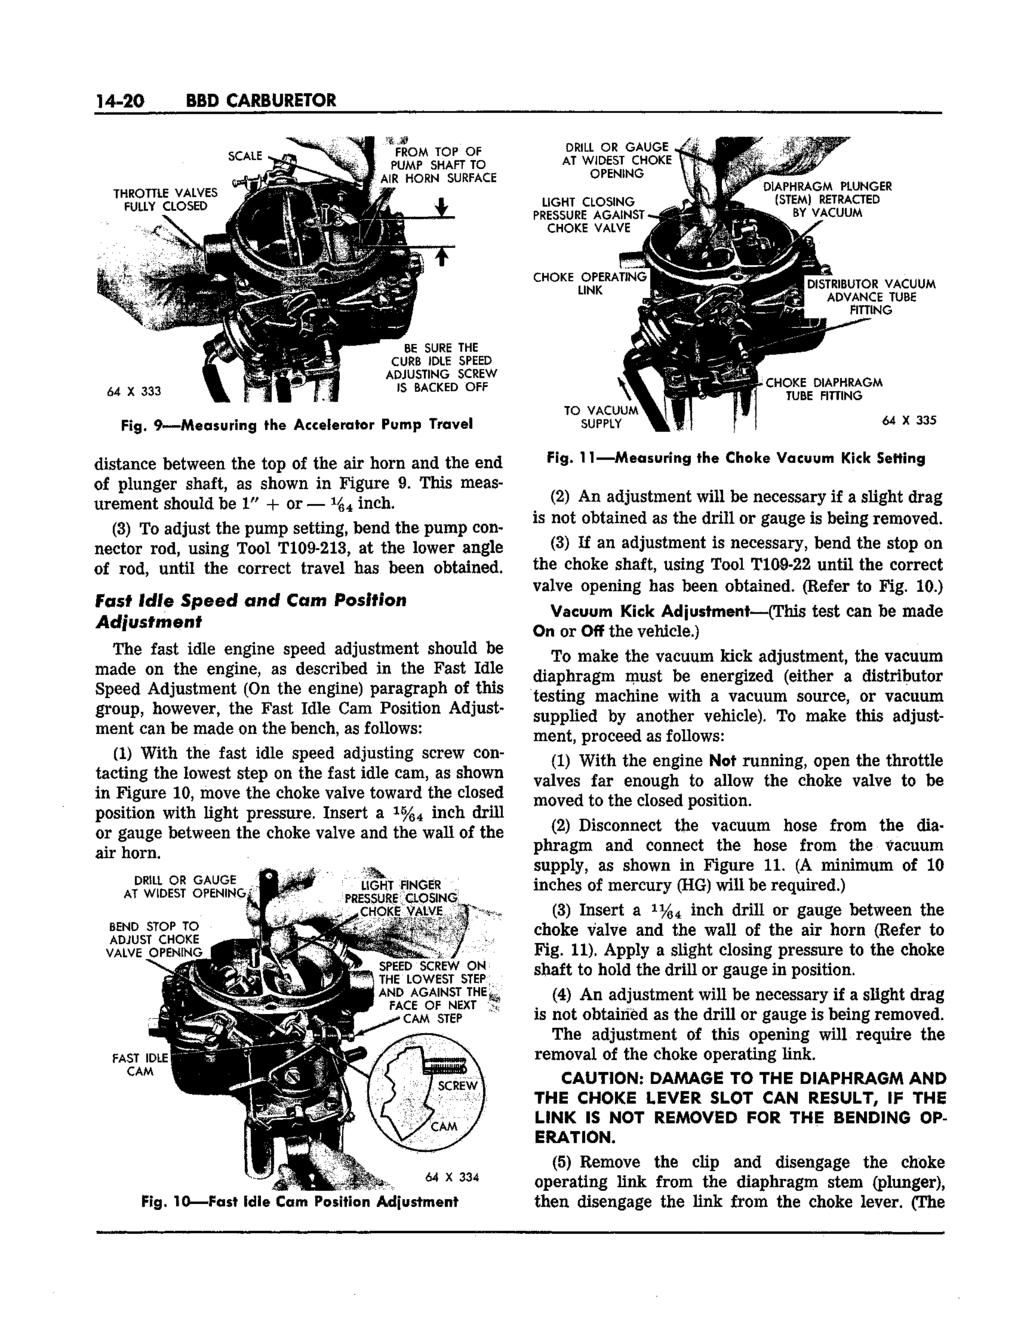 14-20 BBD CARBURETOR Fig. 9 Measuring the Accelerator Pump Travel distance between the top of the air horn and the end of plunger shaft, as shown in Figure 9.